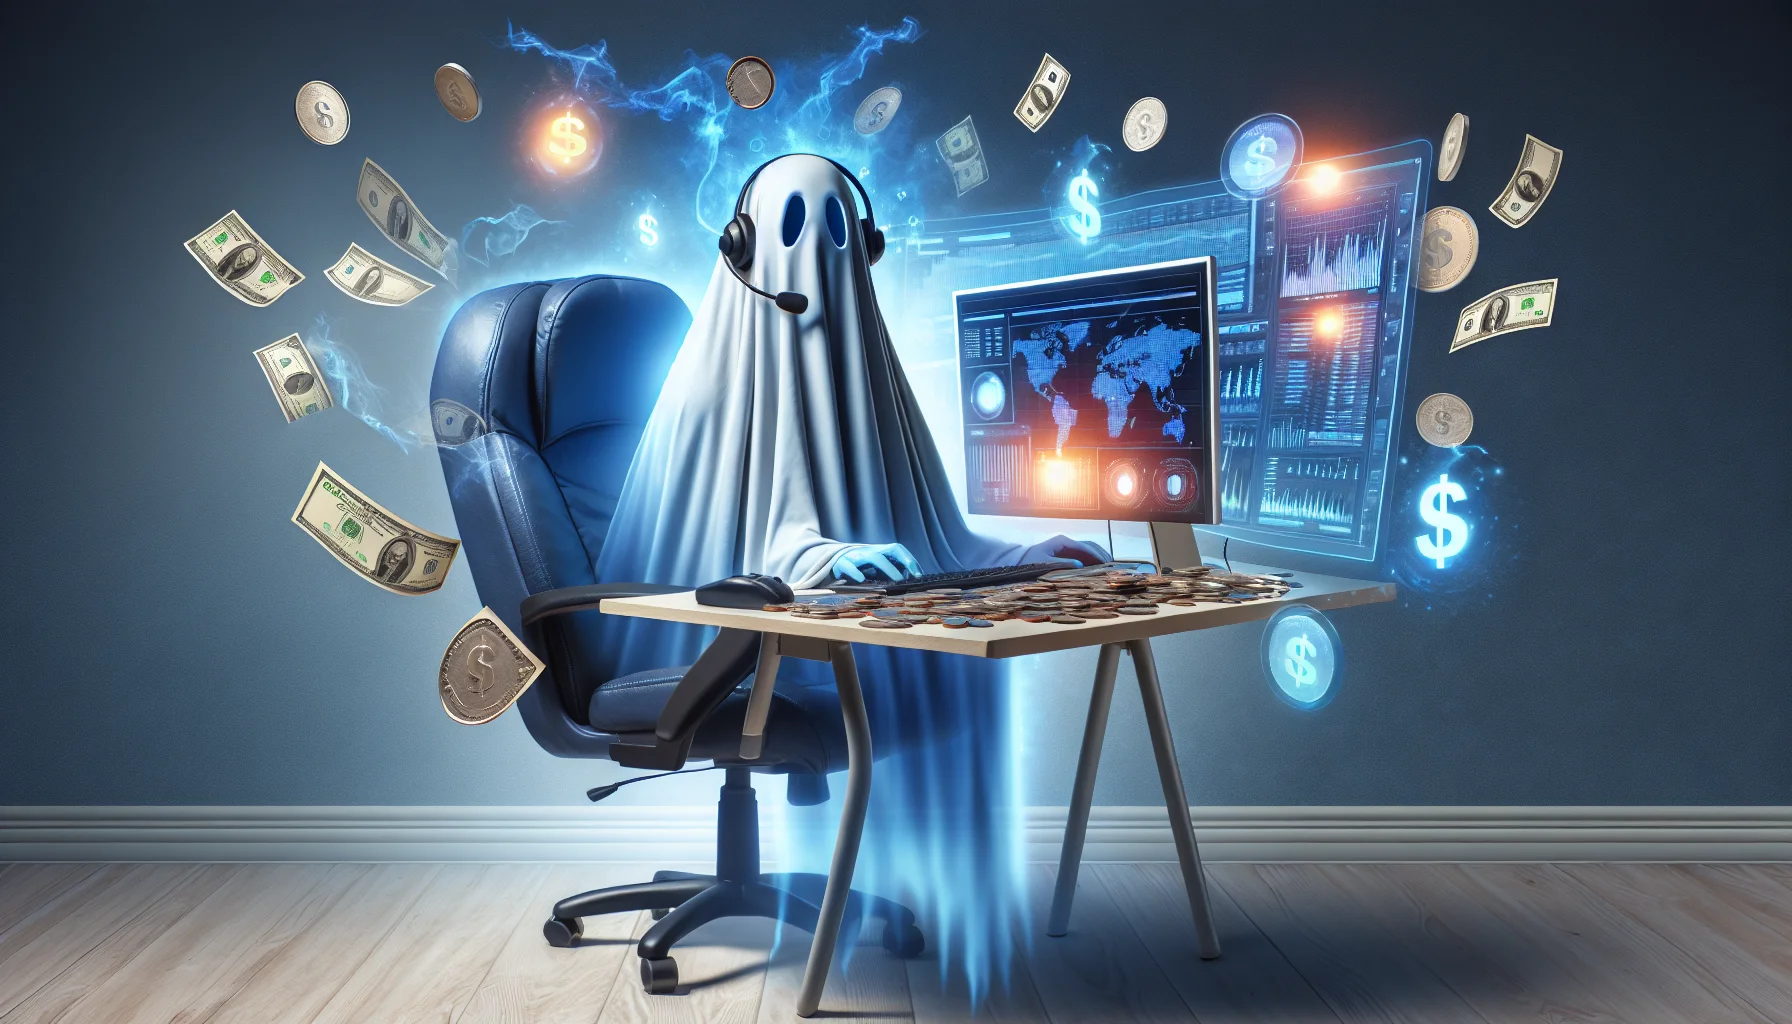 Imagine an amusing and realistic illustration of a spectral-themed affiliate program. Picture this in a scenario related to online income generation. You see an ethereal figure, portrayed as an ordinary, enthusiastic internet marketer in their home workspace, complete with cliché accessories like an over-sized headset and multiple screens displaying graphs and numbers. What makes this figure unique, however, is its ghost-like appearance--semi-transparent, cloaked in a soft, chilling blue hue, and floating slightly above their computer chair. Arrayed before the specter is a whimsical montage with signs of E-commerce success - coins, dollar bills, and glowing screens.